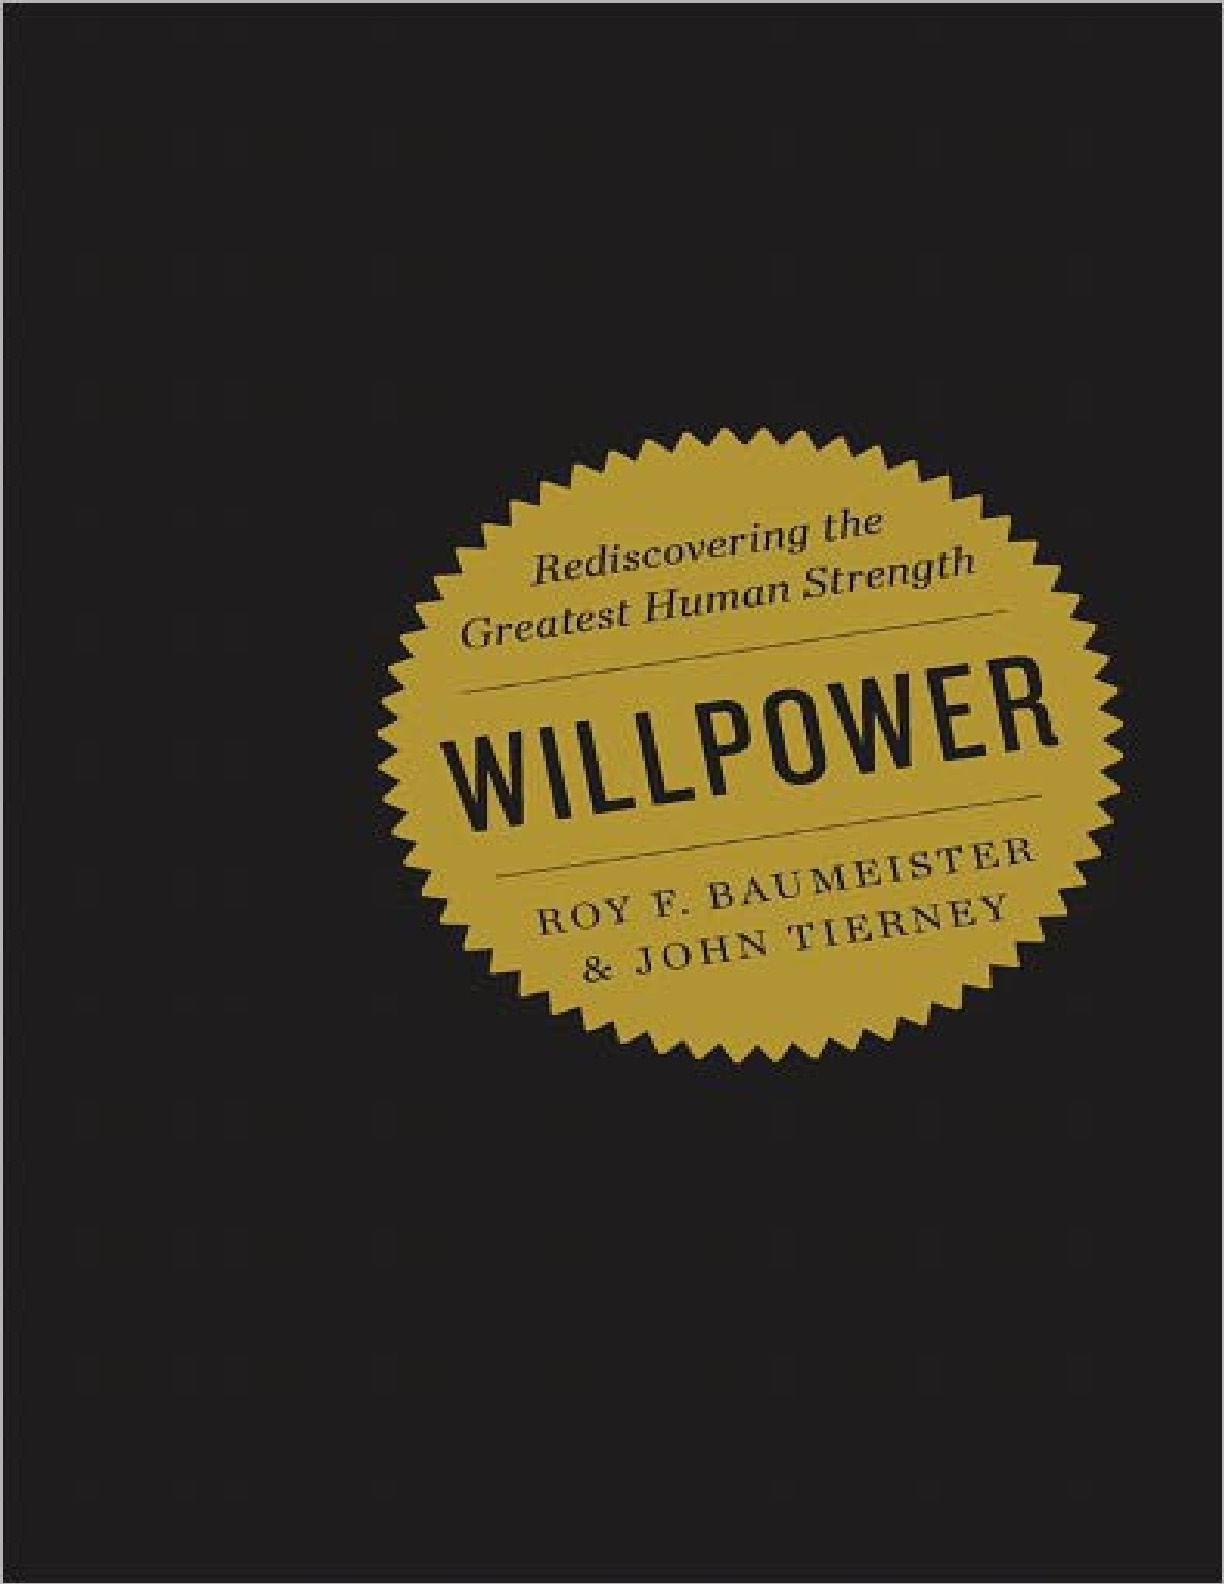 Willpower_ Rediscovering the Greatest Human Strength – Roy F. Baumeister; John Tierney